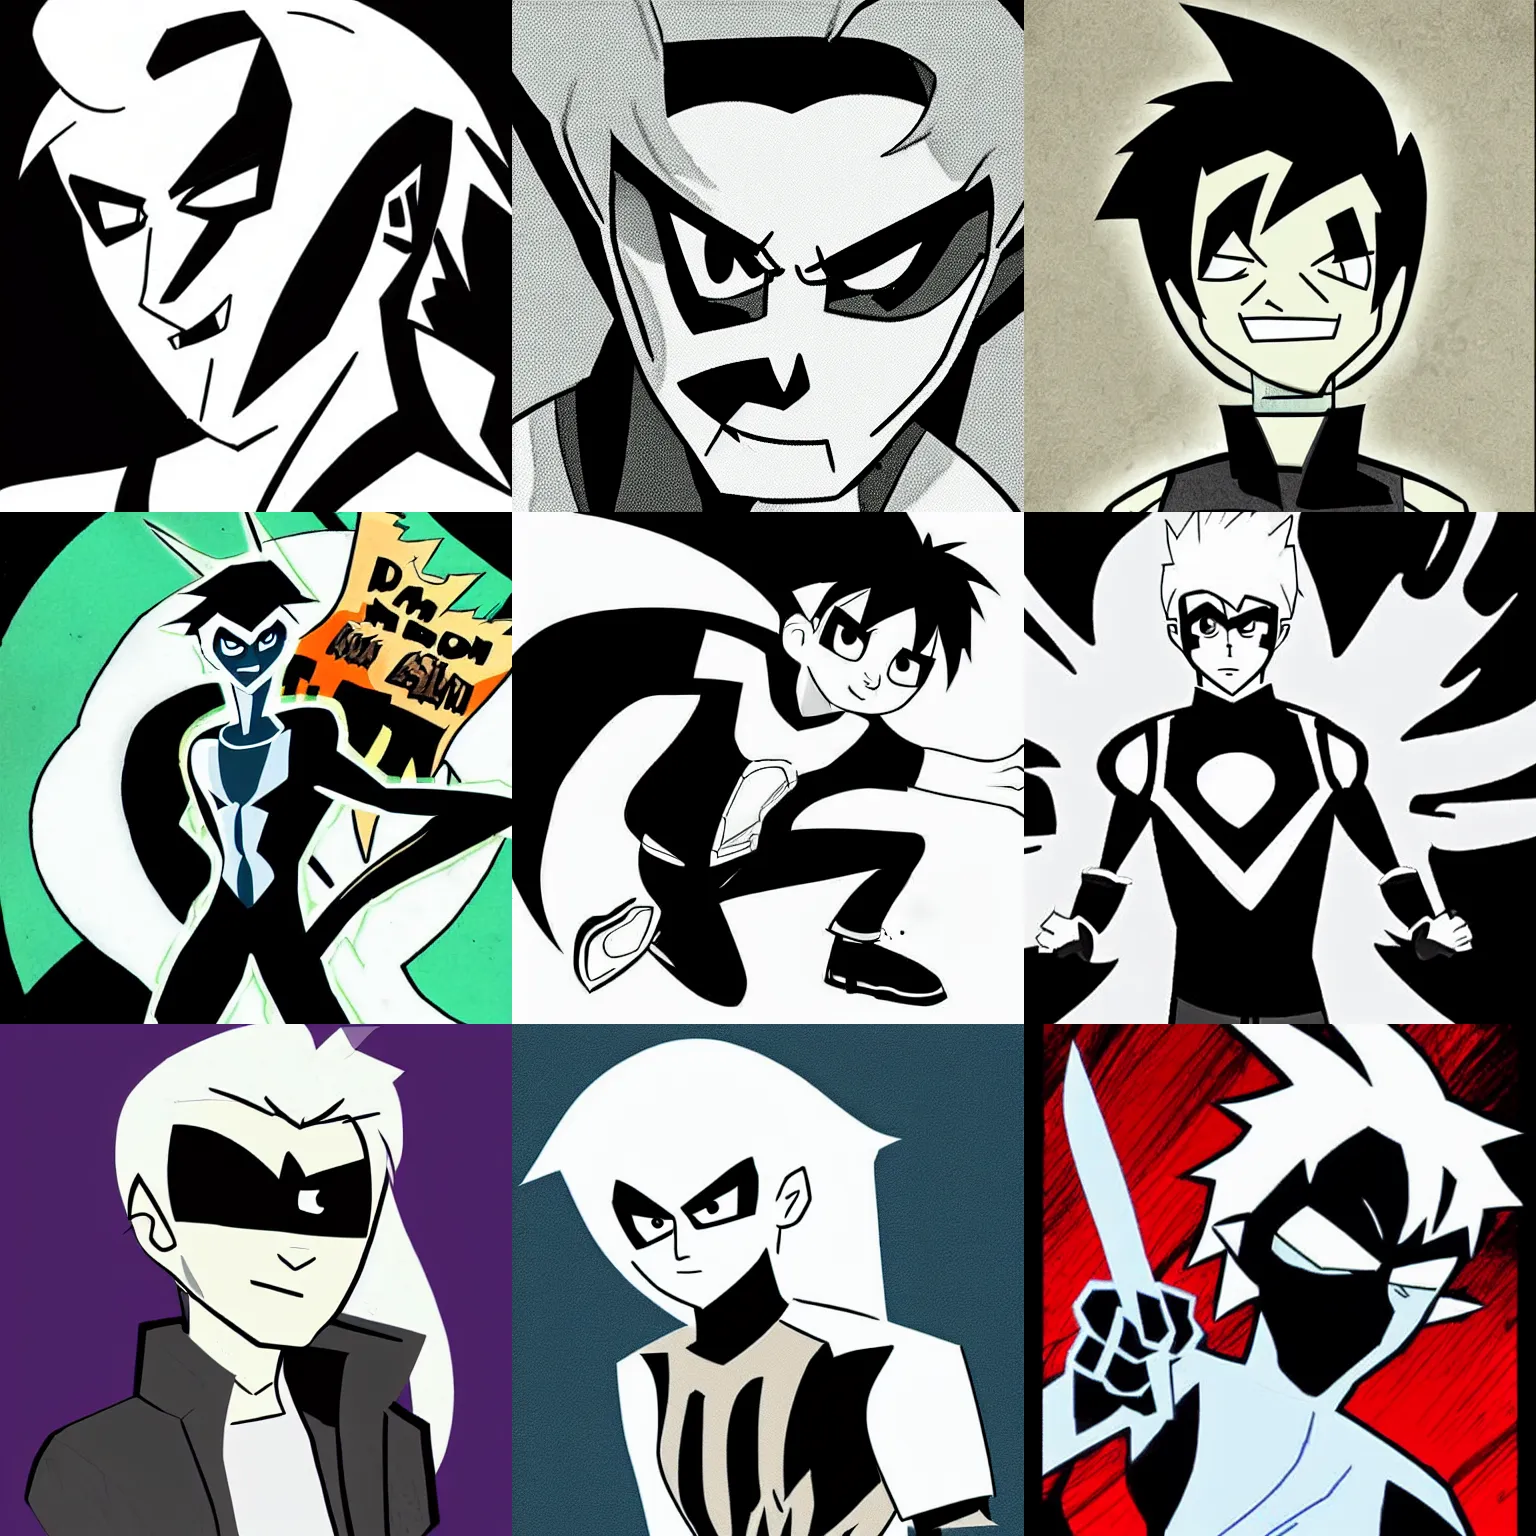 Prompt: danny phantom, drawn in the style of comic book artist frank miller